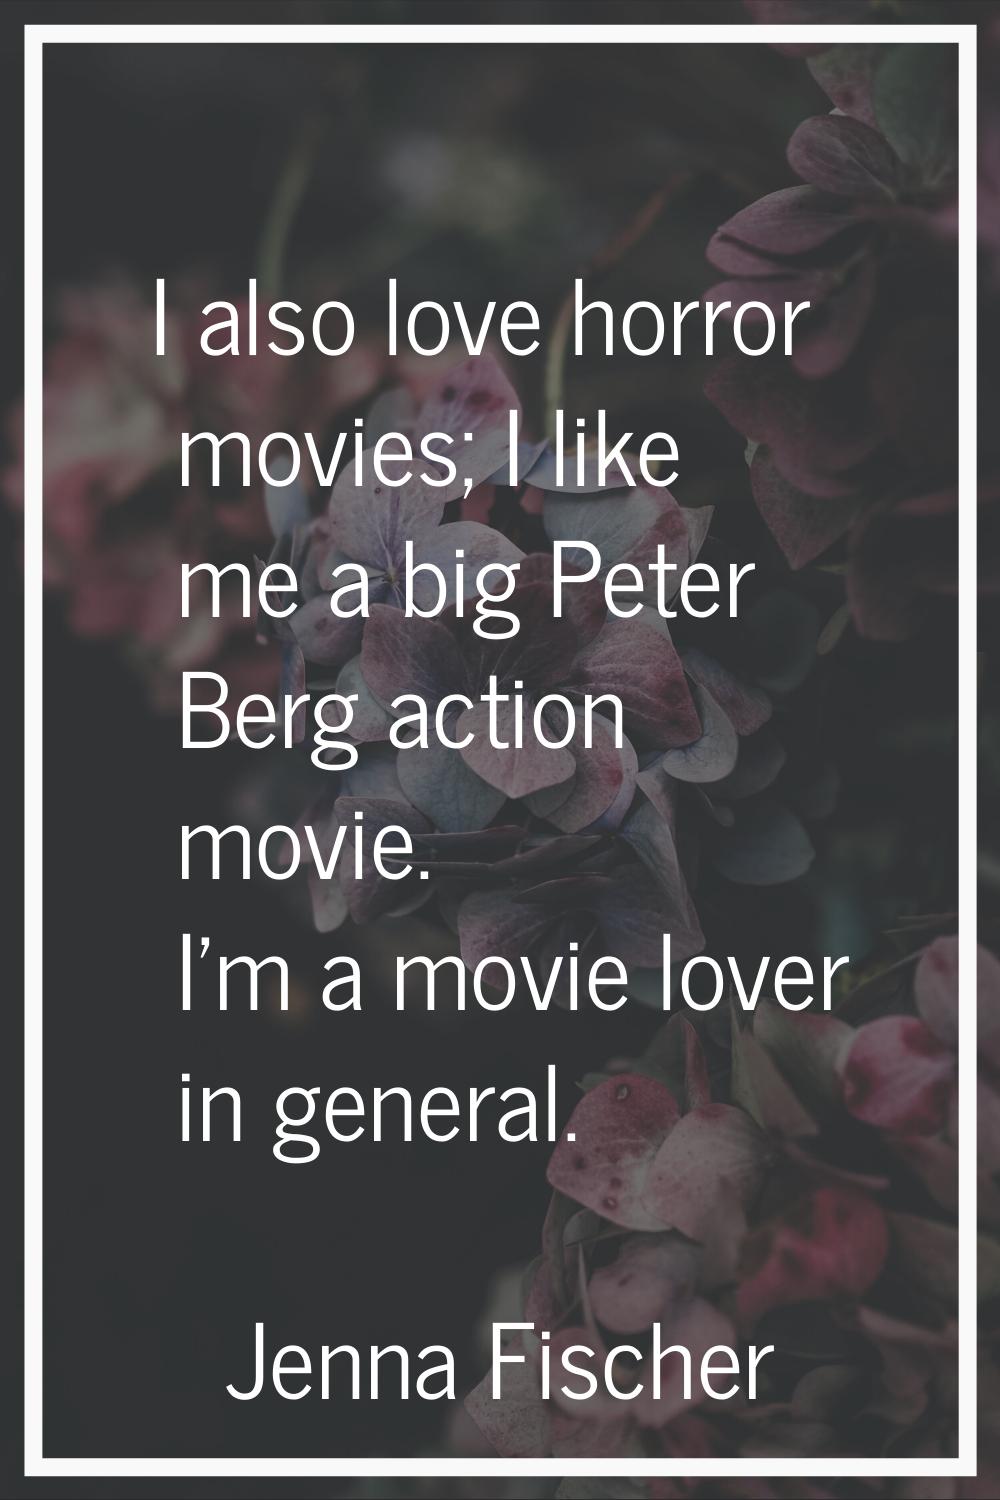 I also love horror movies; I like me a big Peter Berg action movie. I'm a movie lover in general.